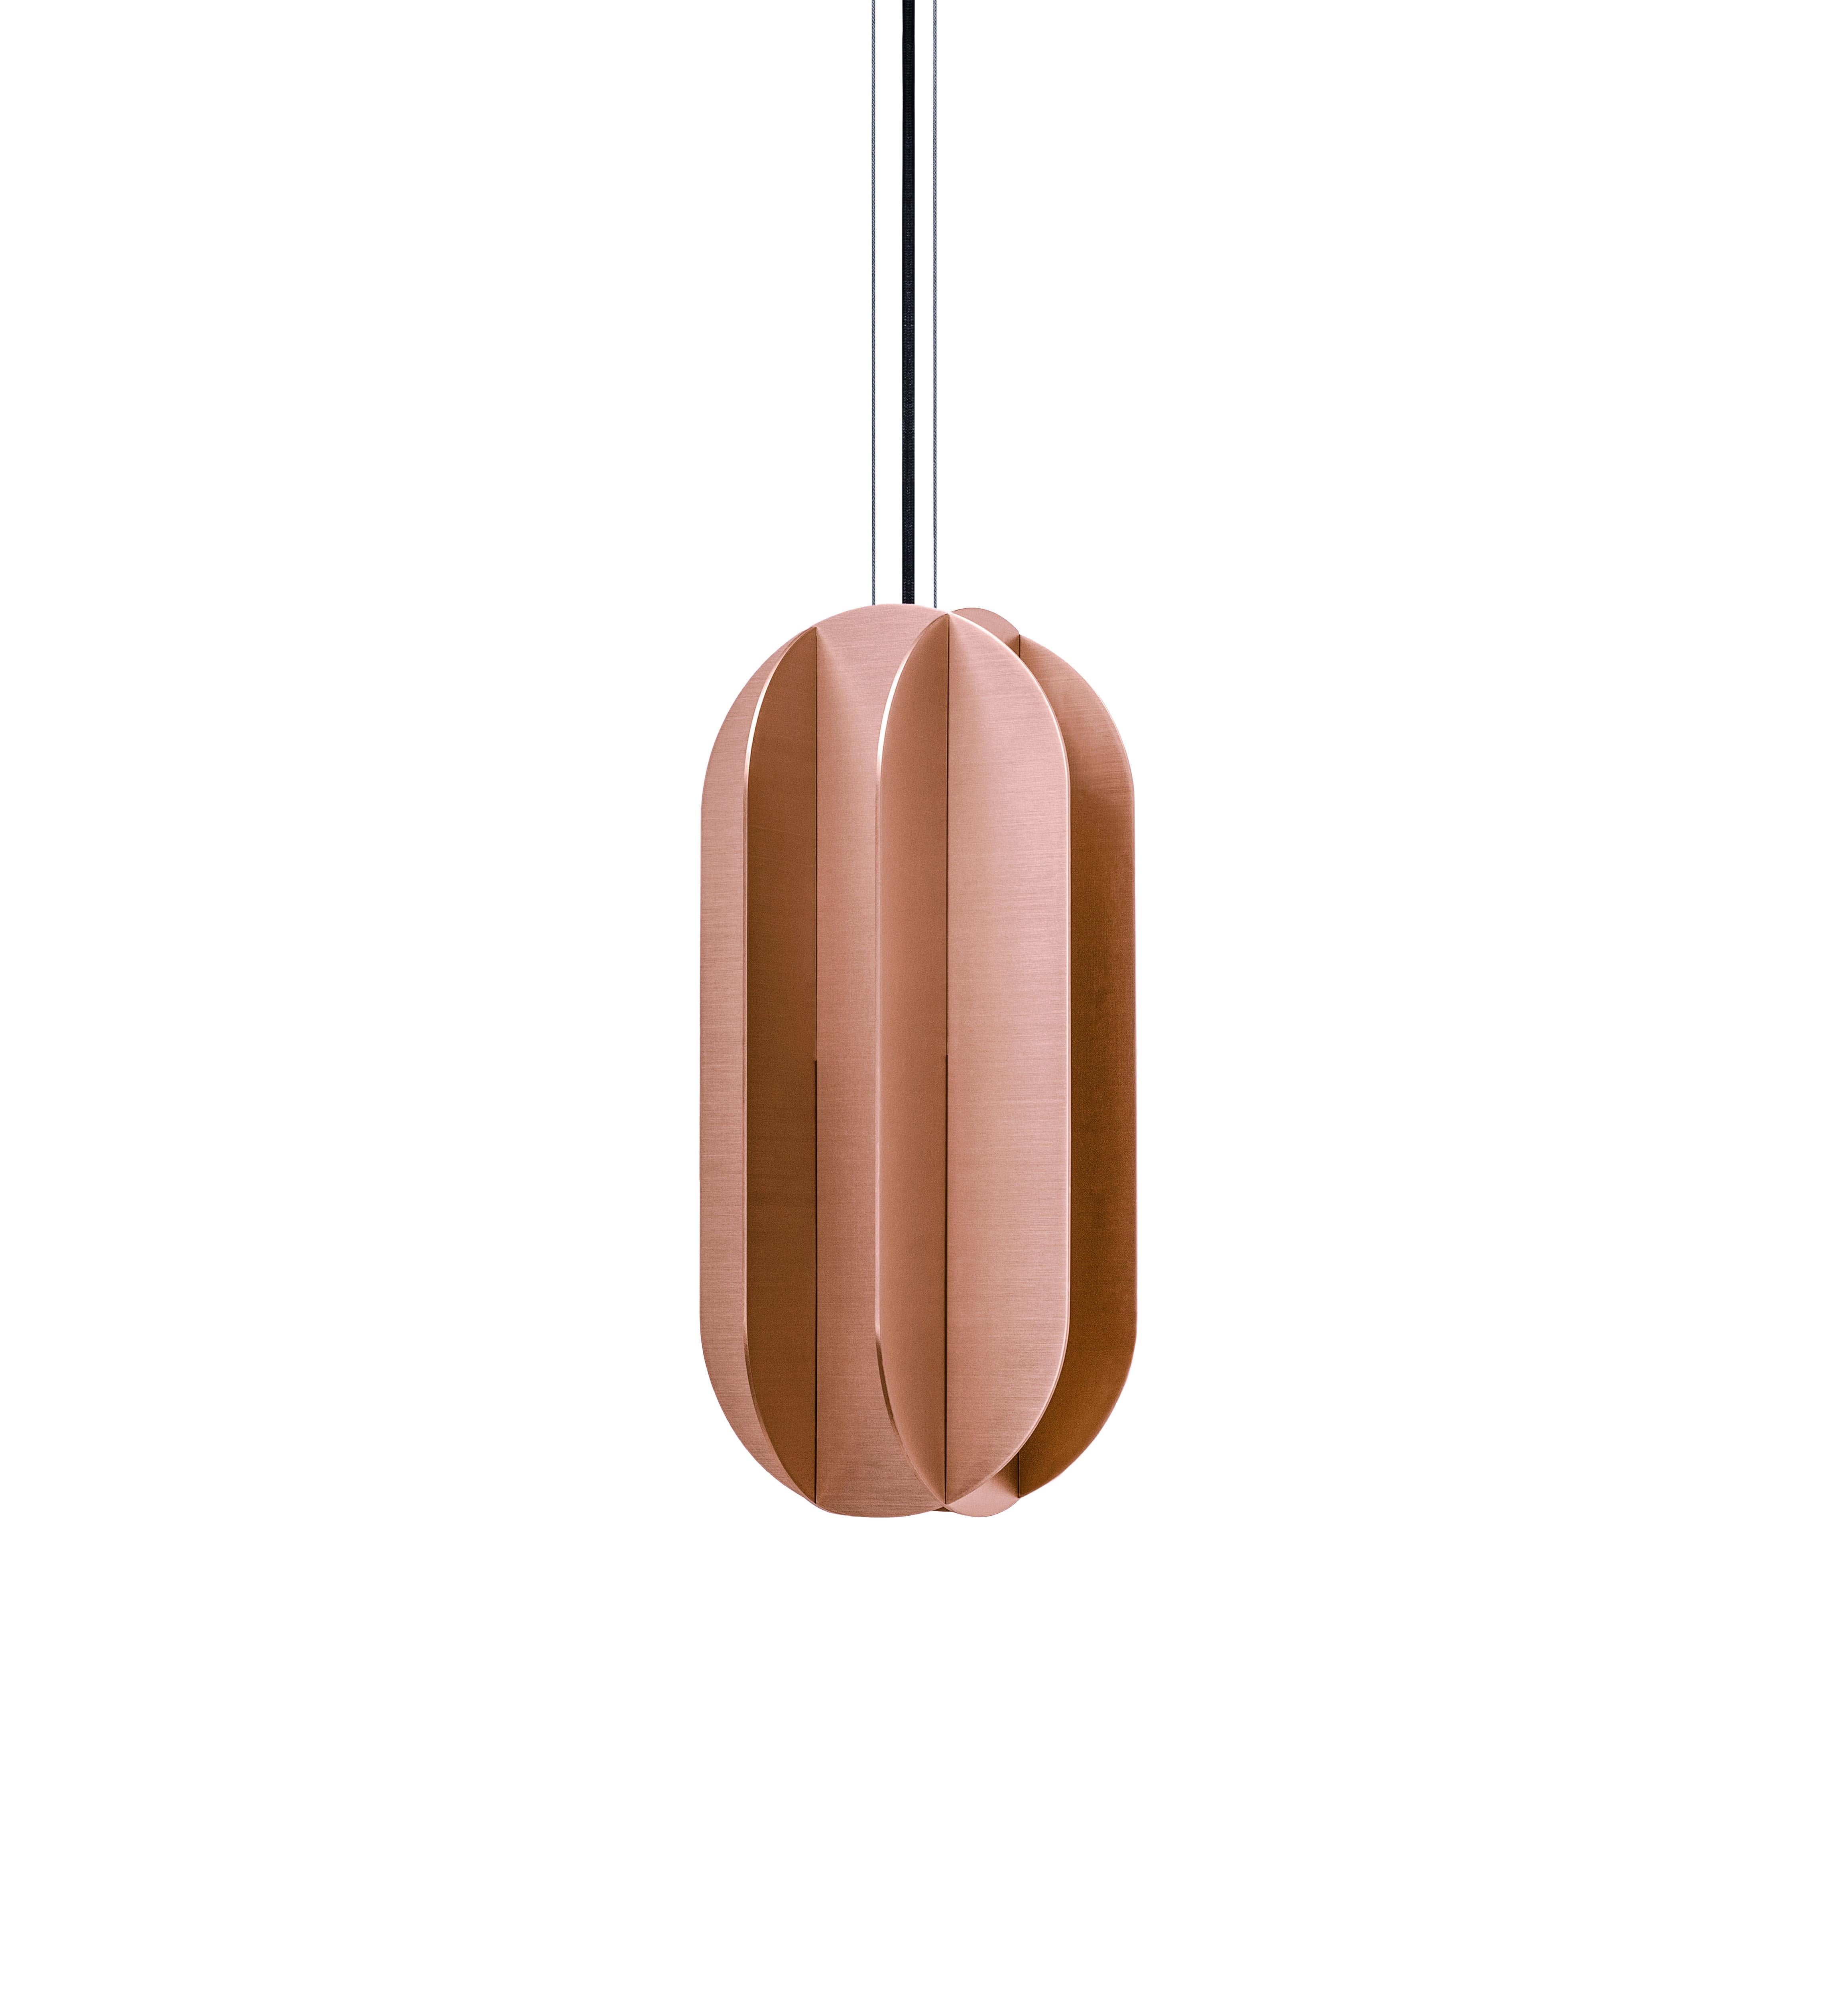 Set of Three Contemporary Pendant Lamp EL Lamps CS2 by NOOM in Copper 1